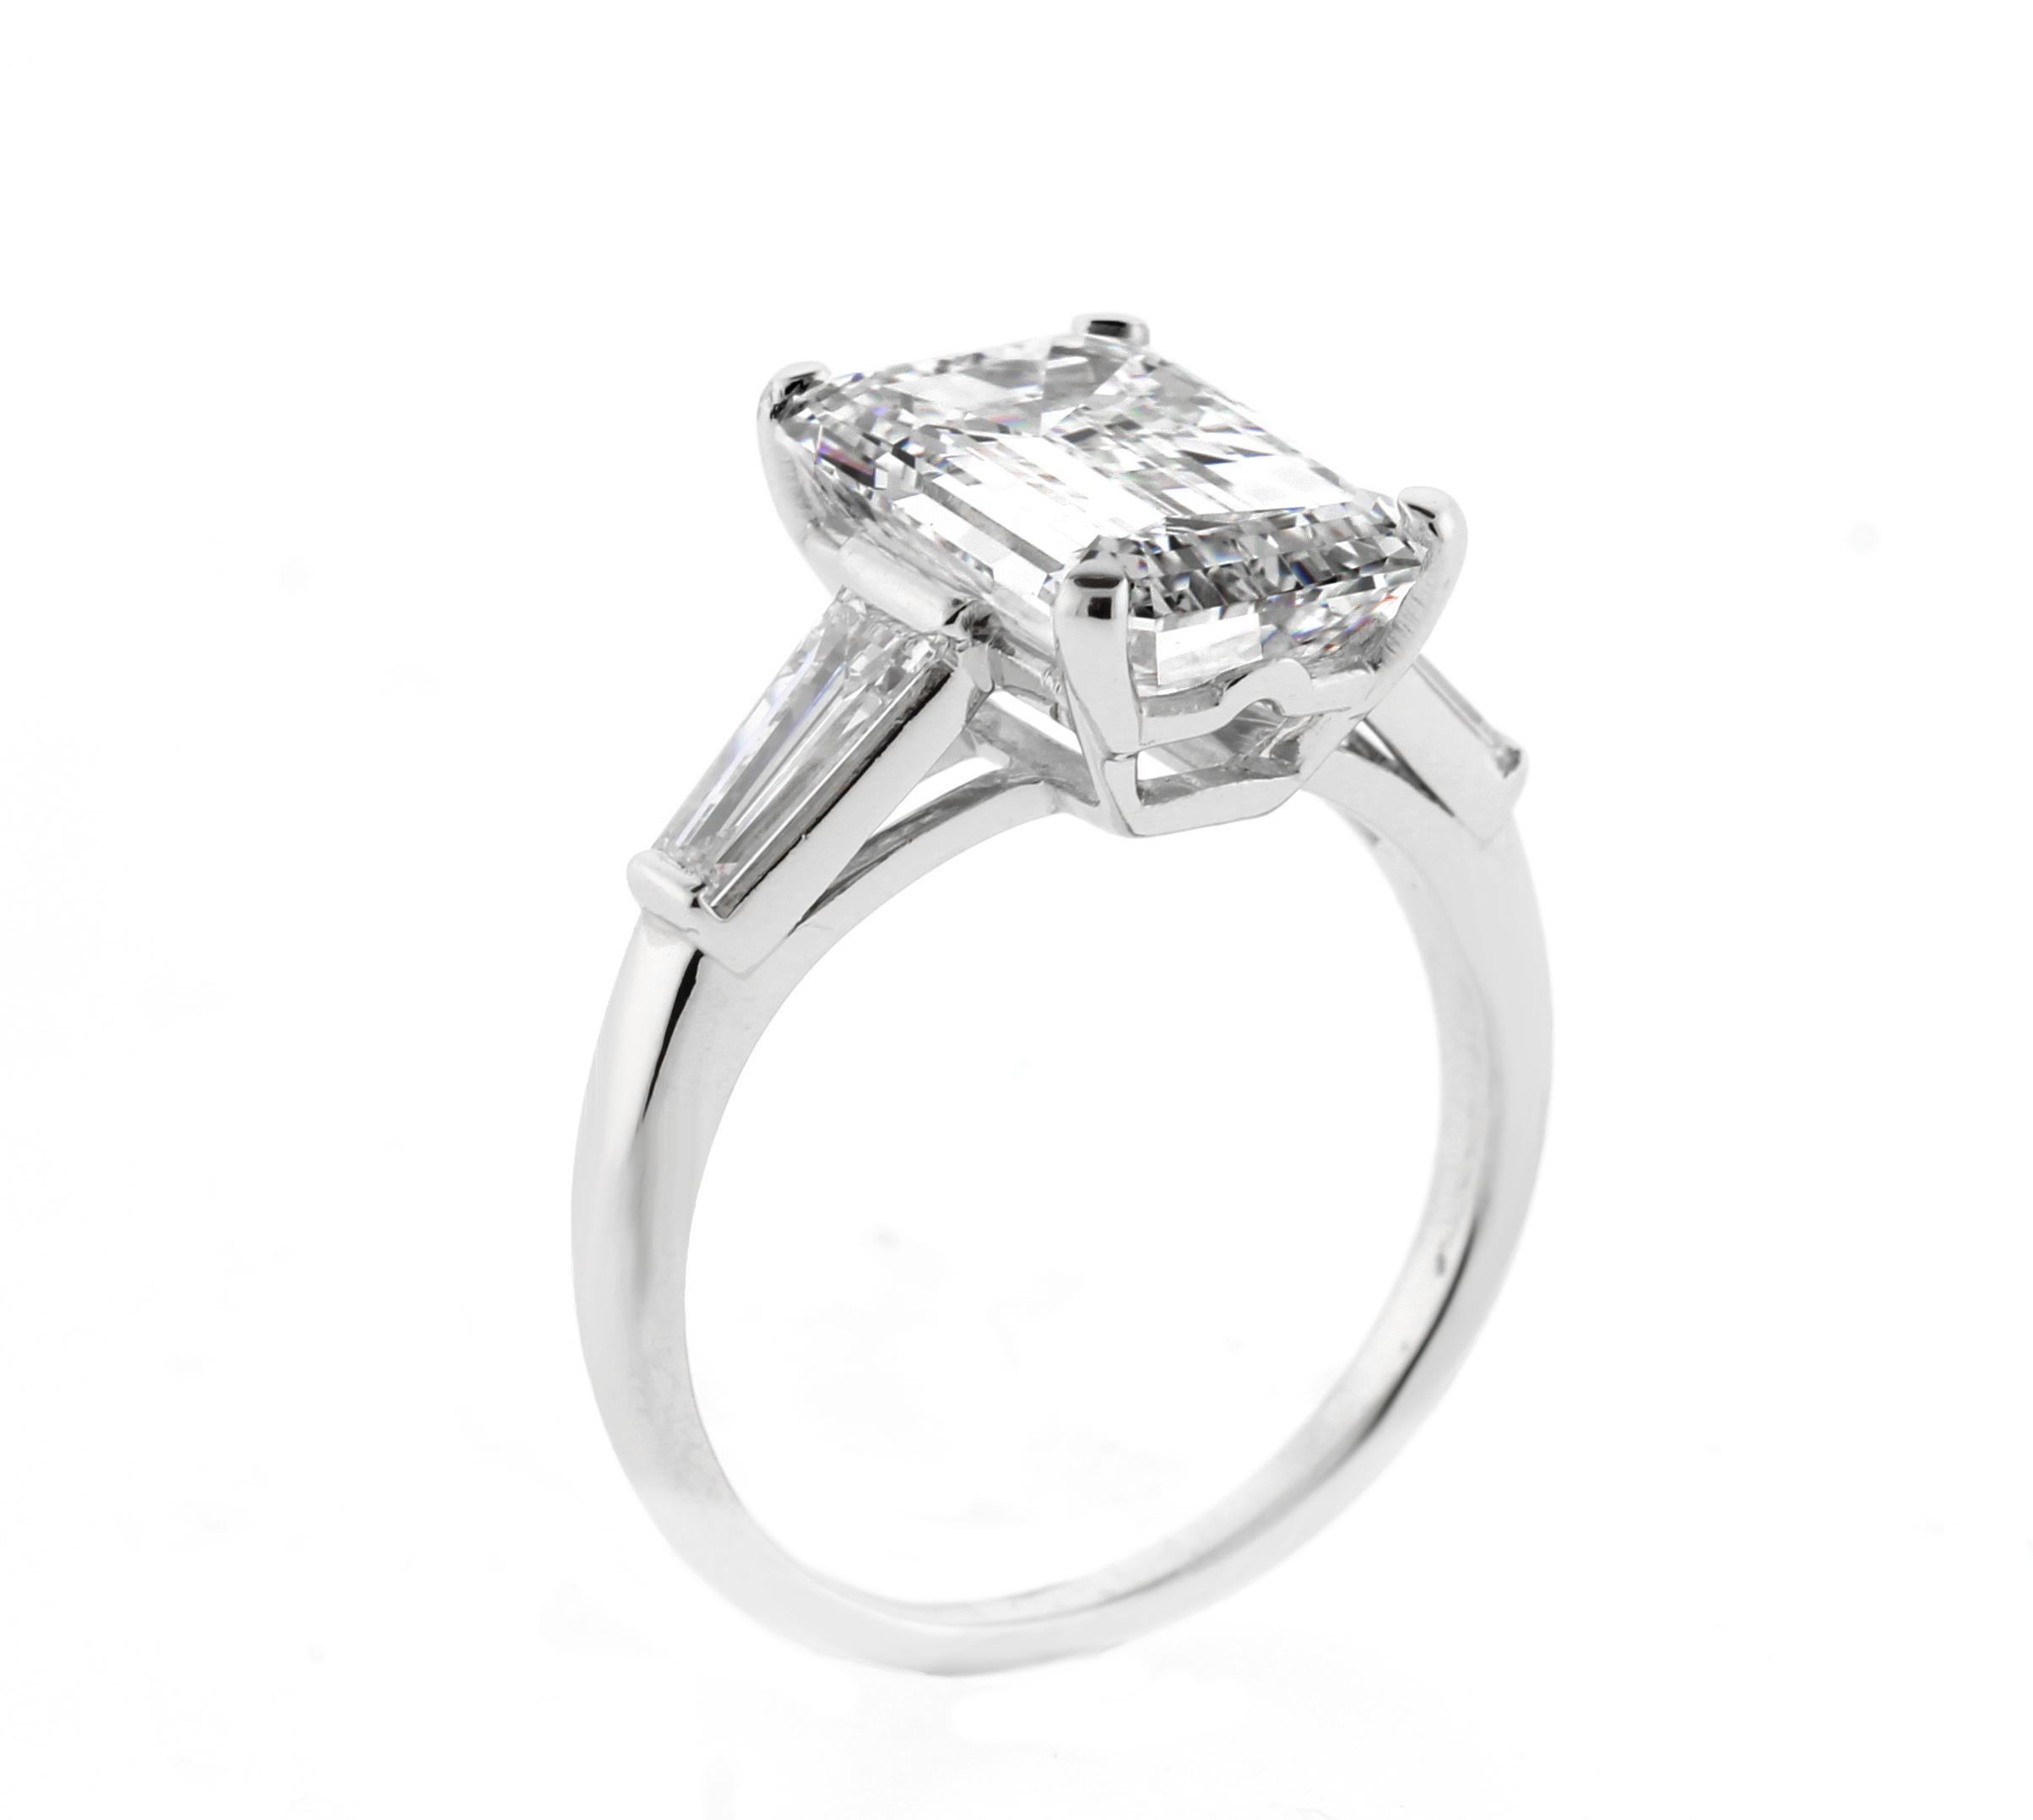 Women's or Men's 4.39 Carat G.I.A Emerald Cut Diamond Solitaire Ring For Sale